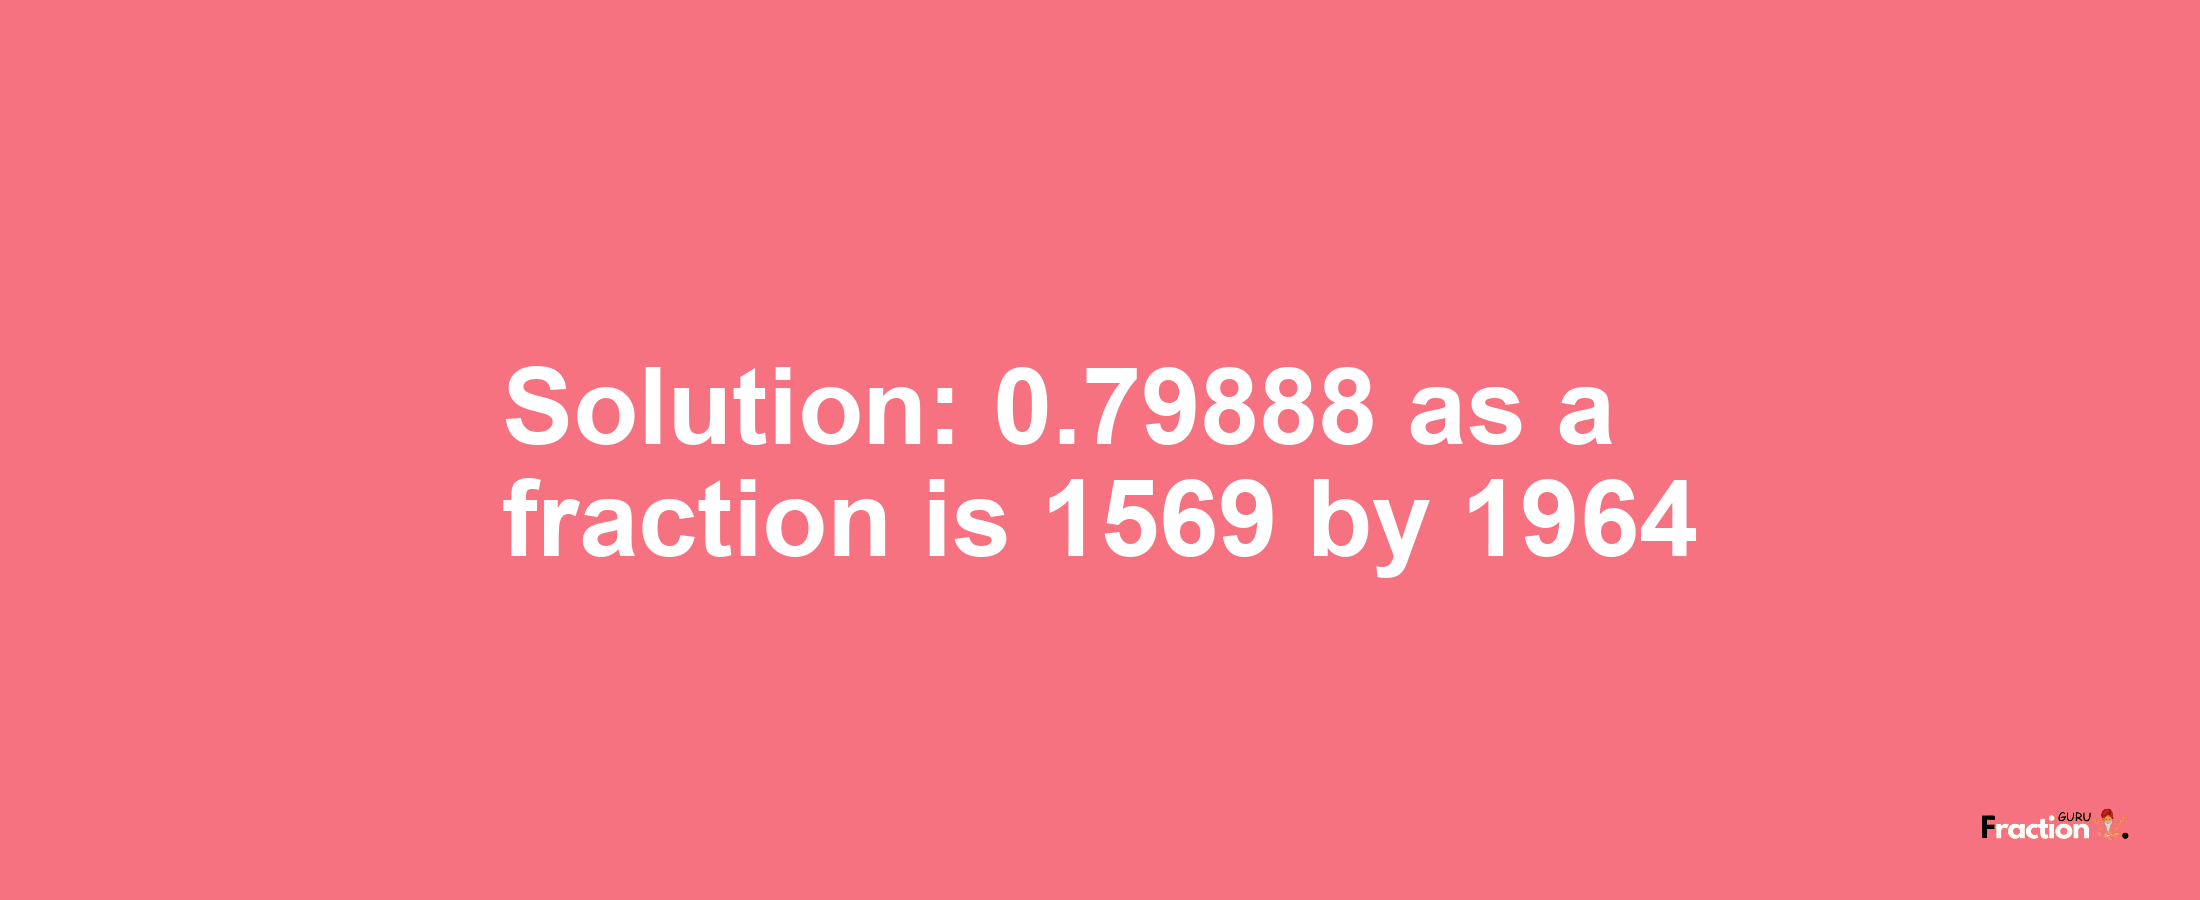 Solution:0.79888 as a fraction is 1569/1964